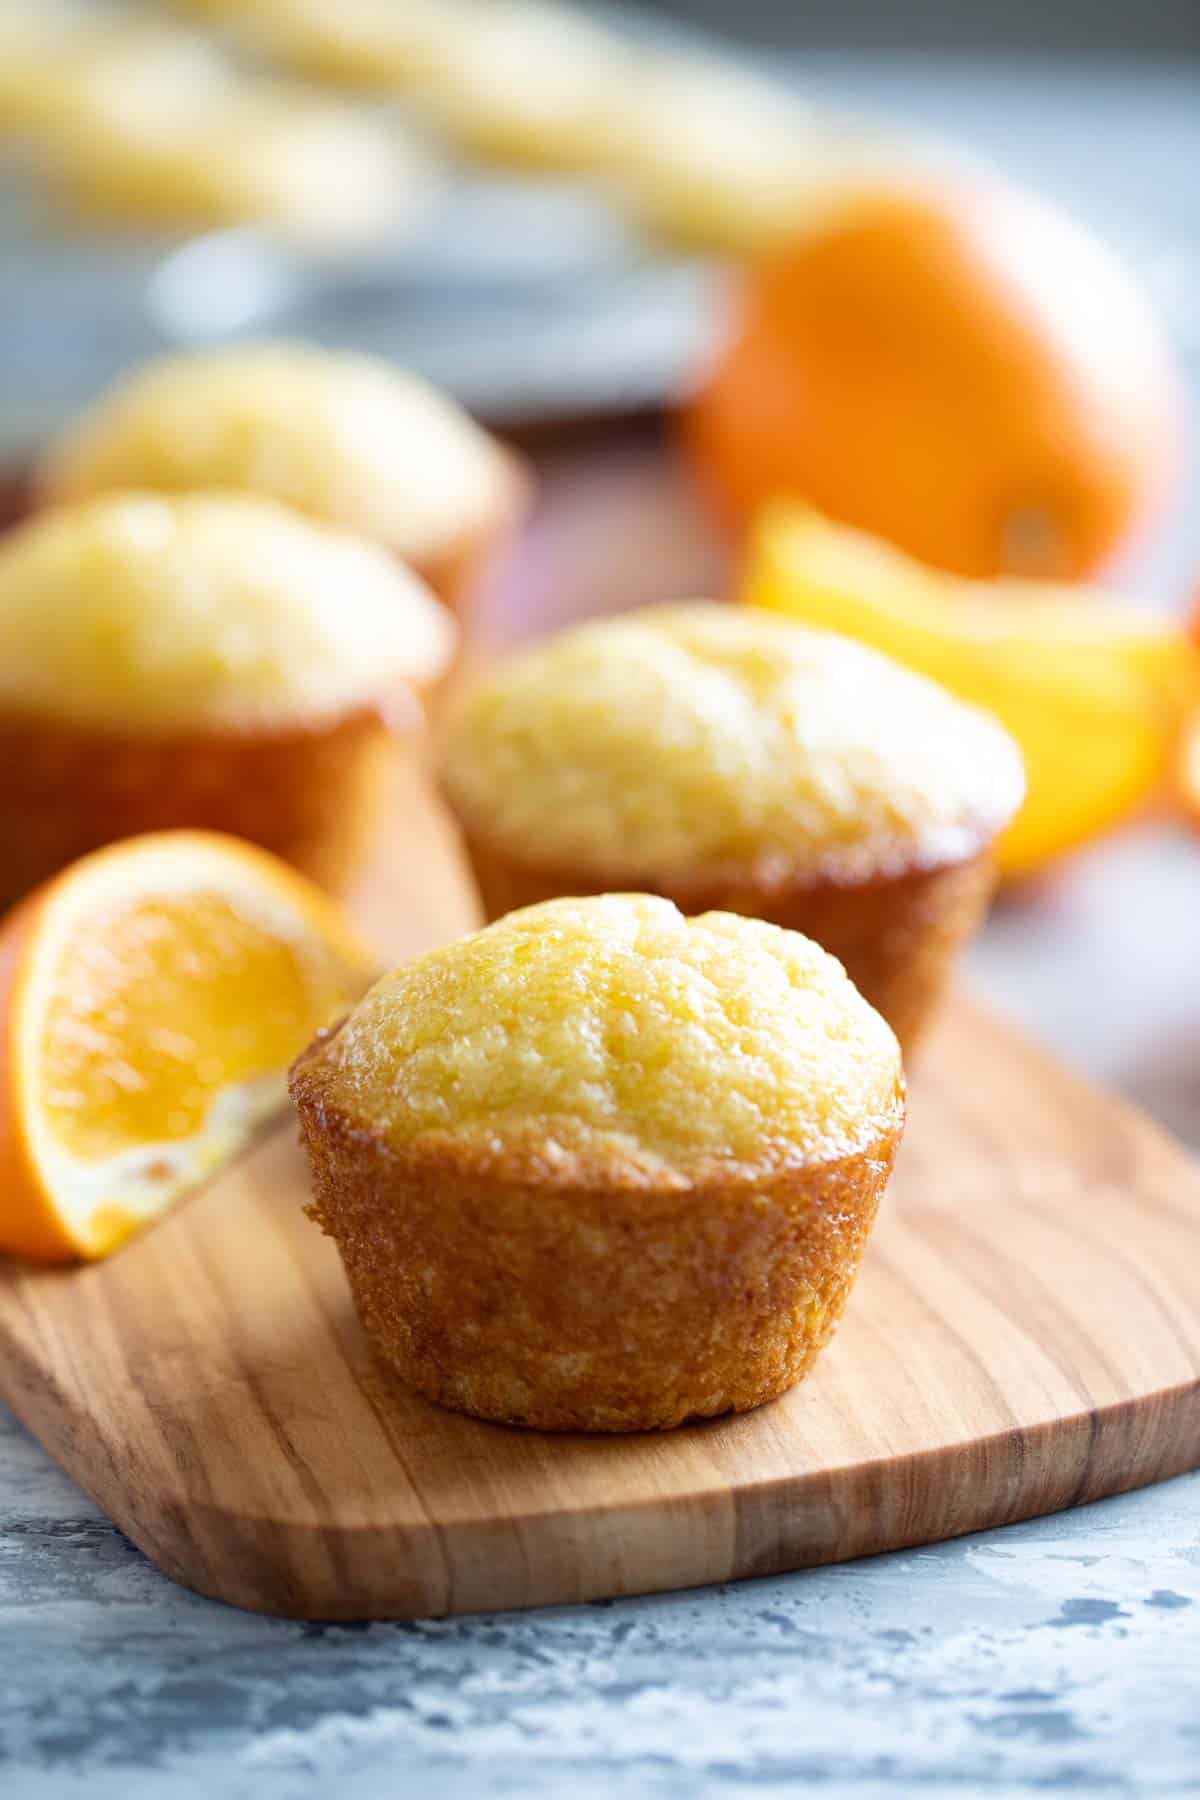 Orange muffins with an orange simple syrup on a wooden board.